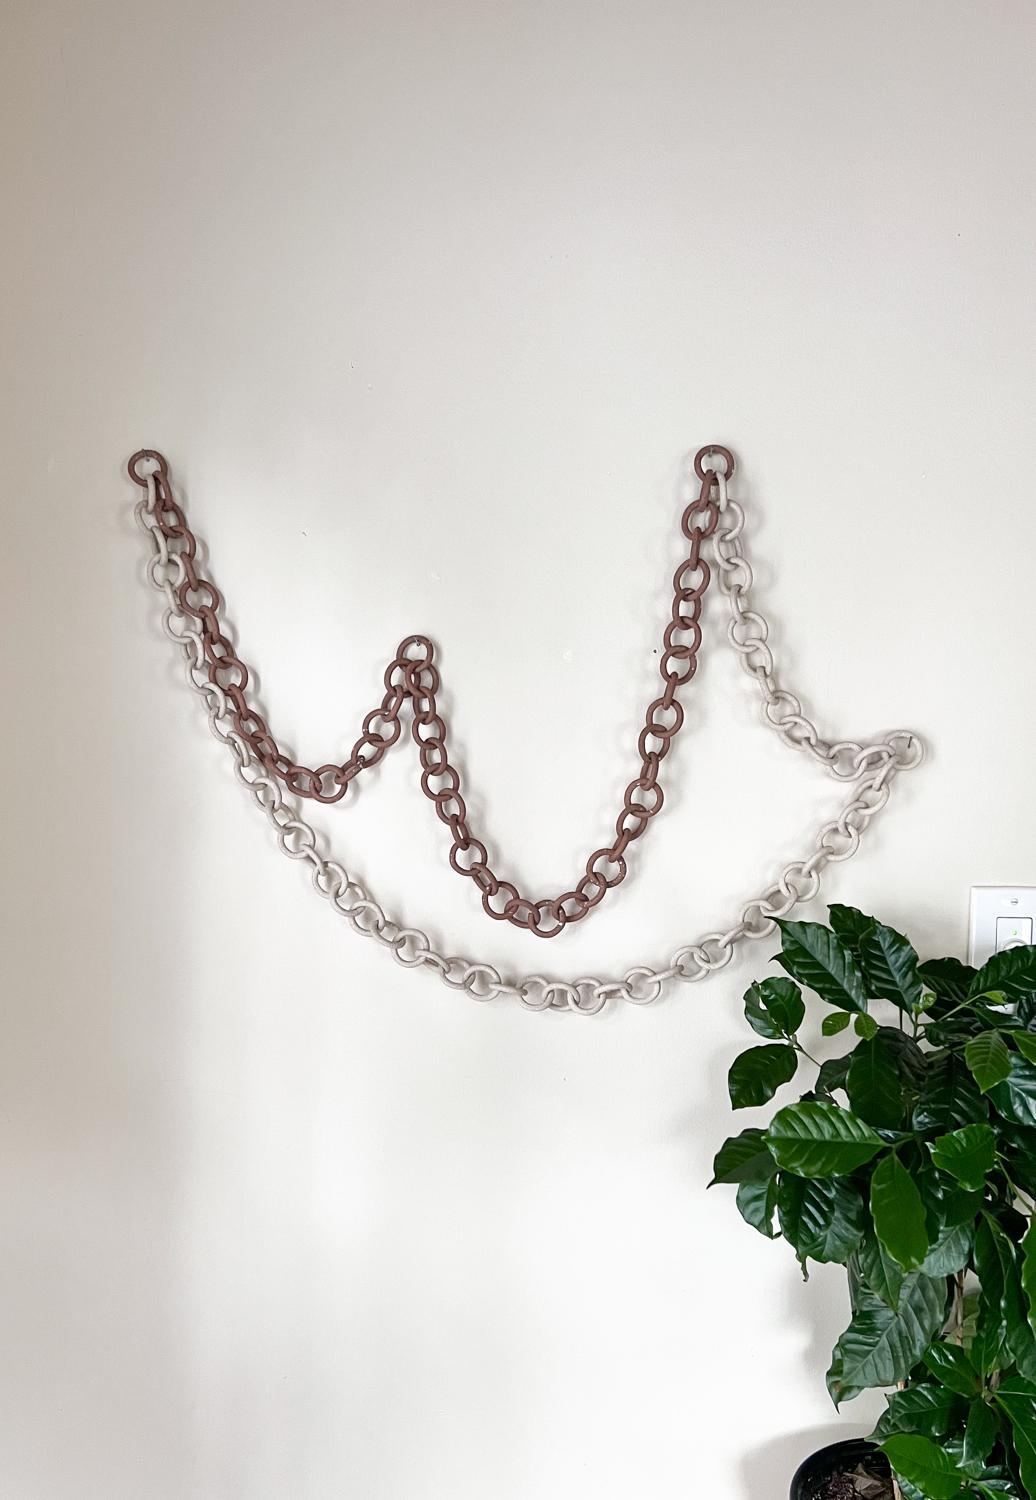 American Ceramic Link Chain Sculpture and Wall Hanging